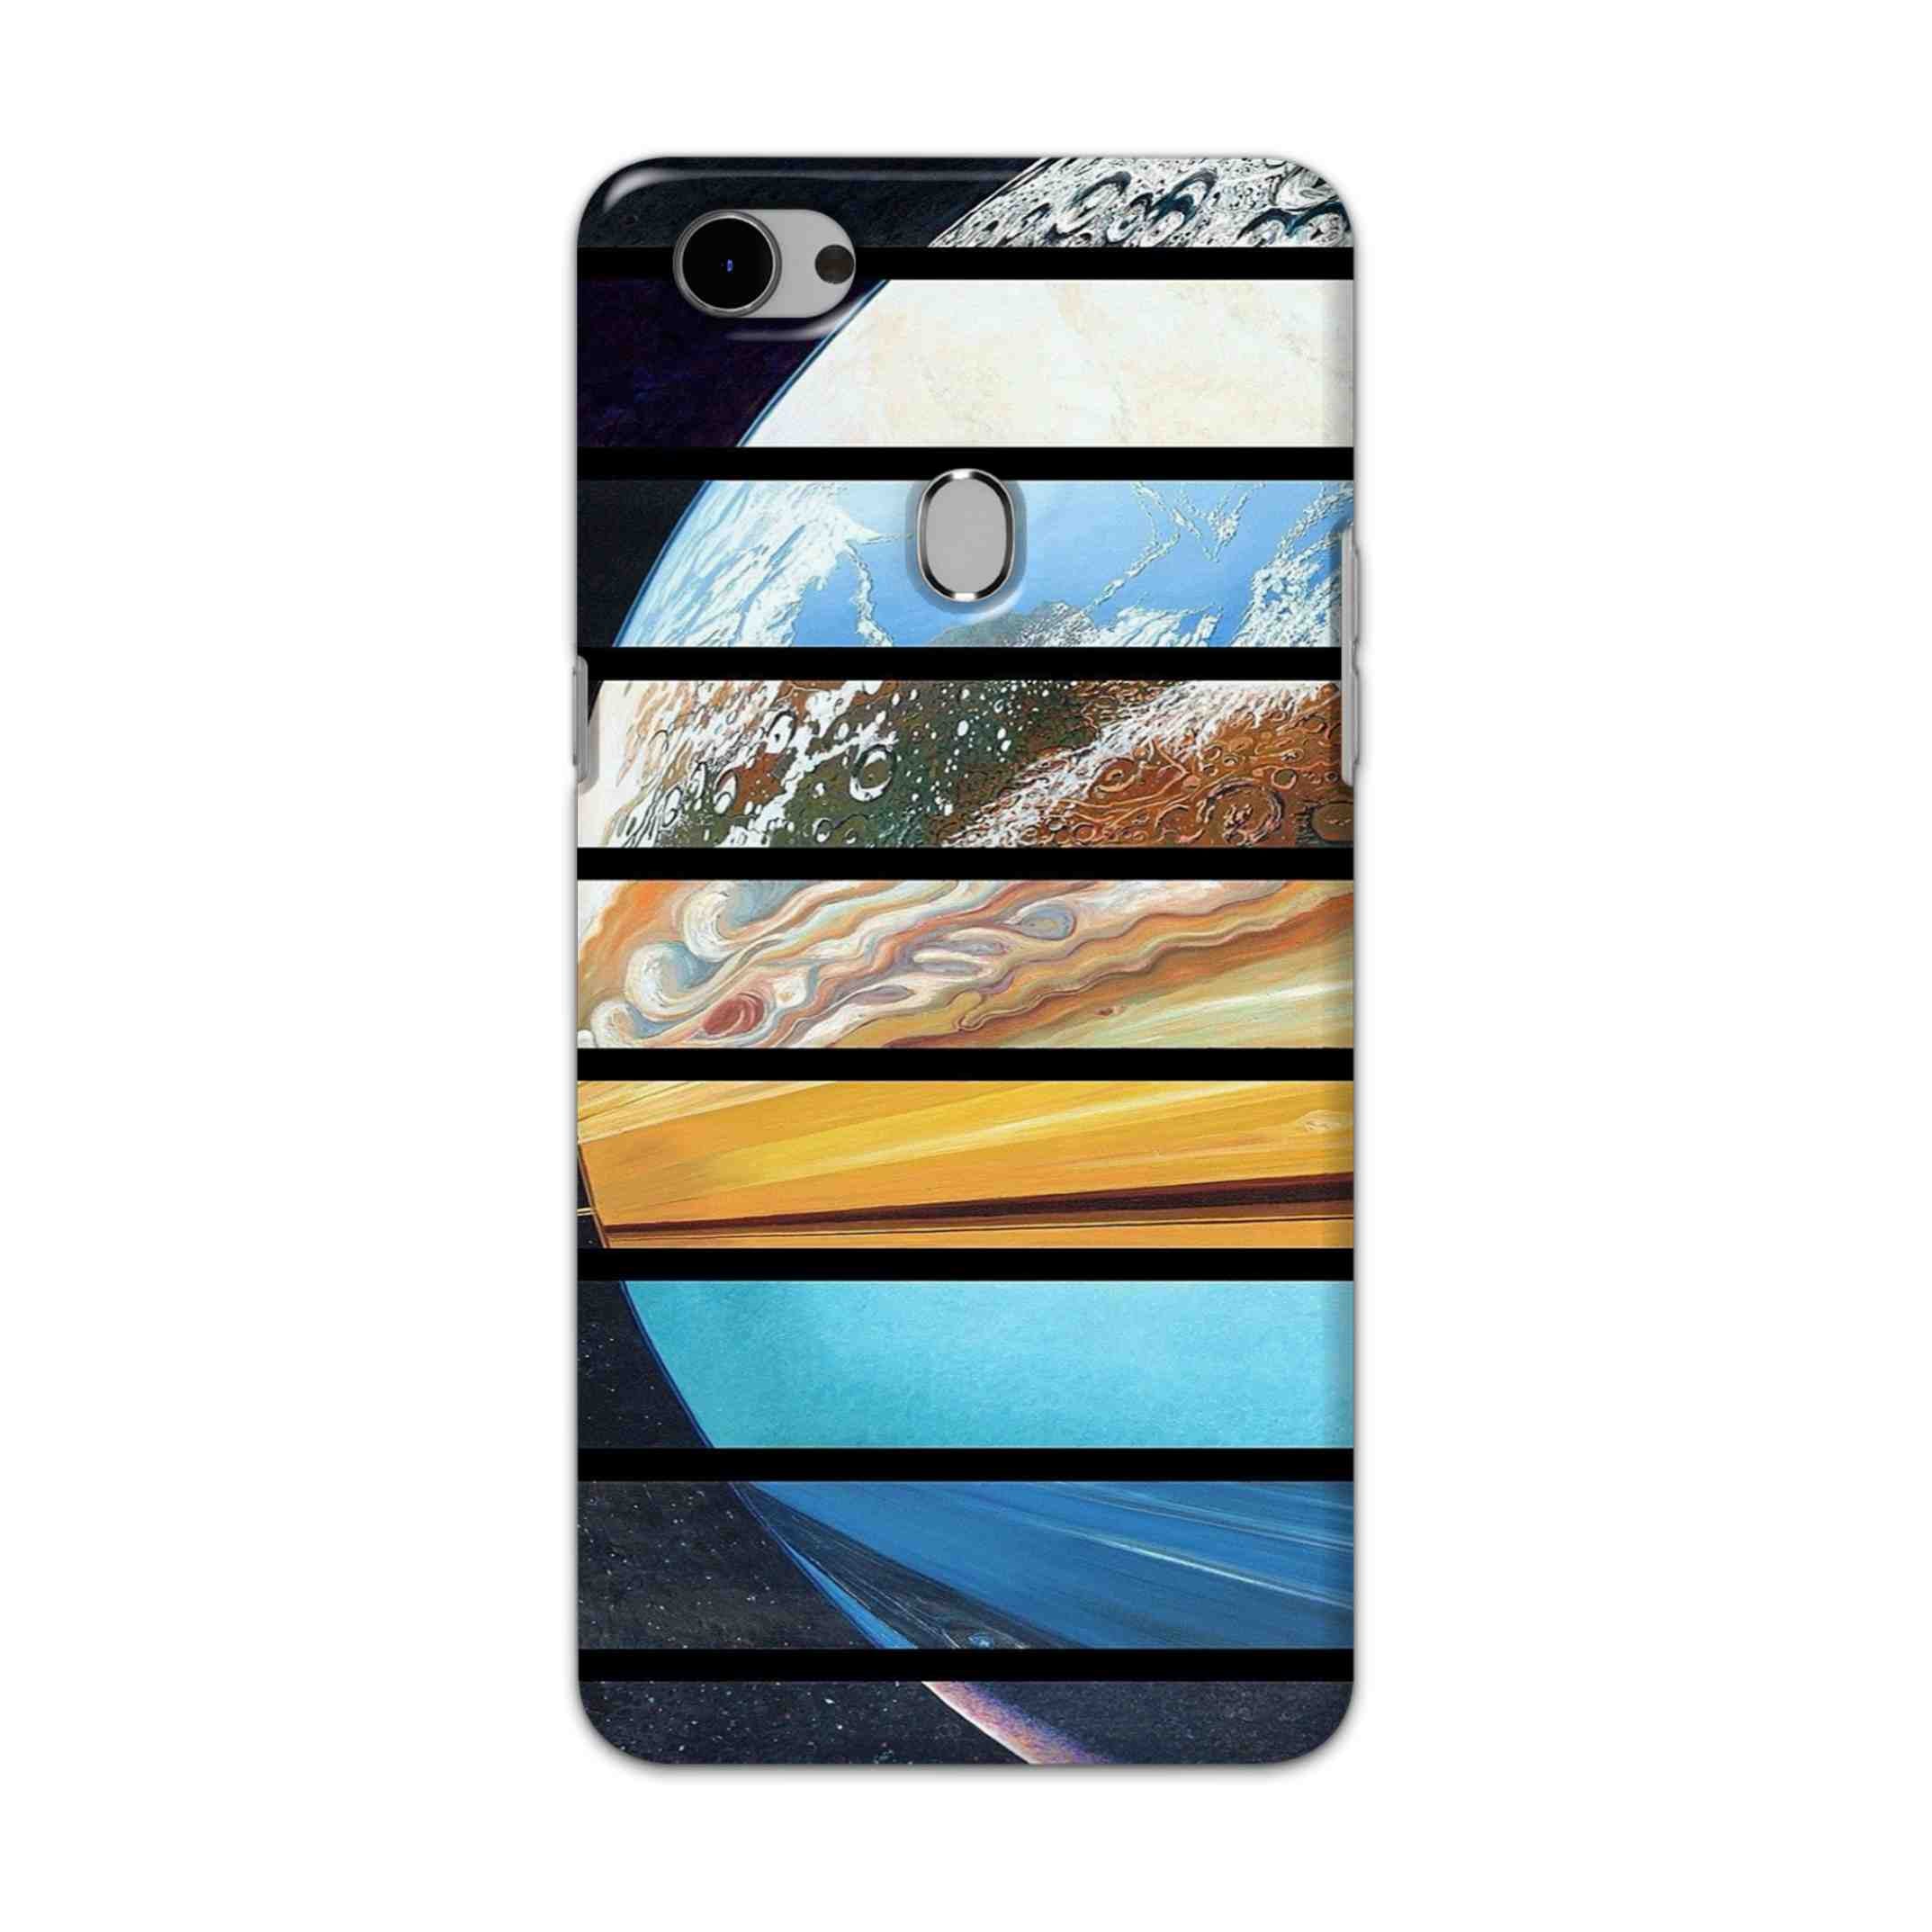 Buy Colourful Earth Hard Back Mobile Phone Case Cover For Oppo F7 Online